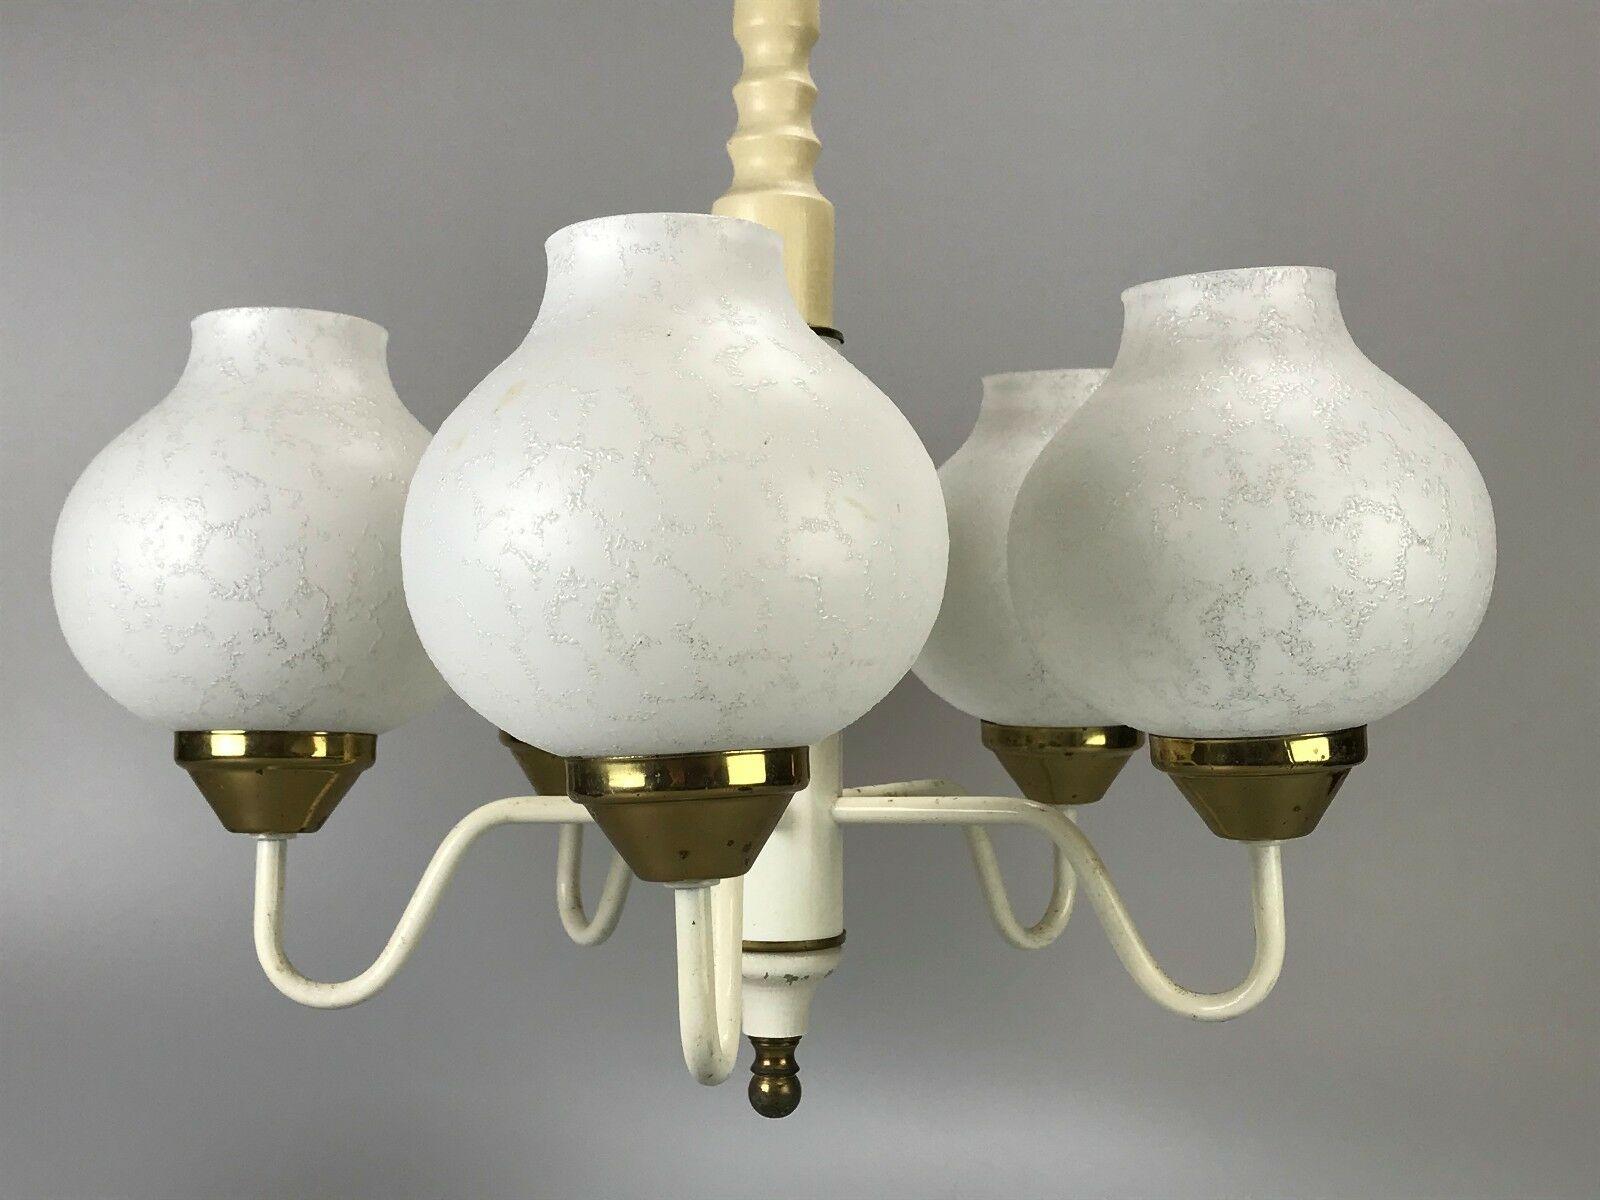 70s Lamp Light Ceiling Lamp Hanging Lamp Chandelier Space Age Design In Fair Condition For Sale In Neuenkirchen, NI